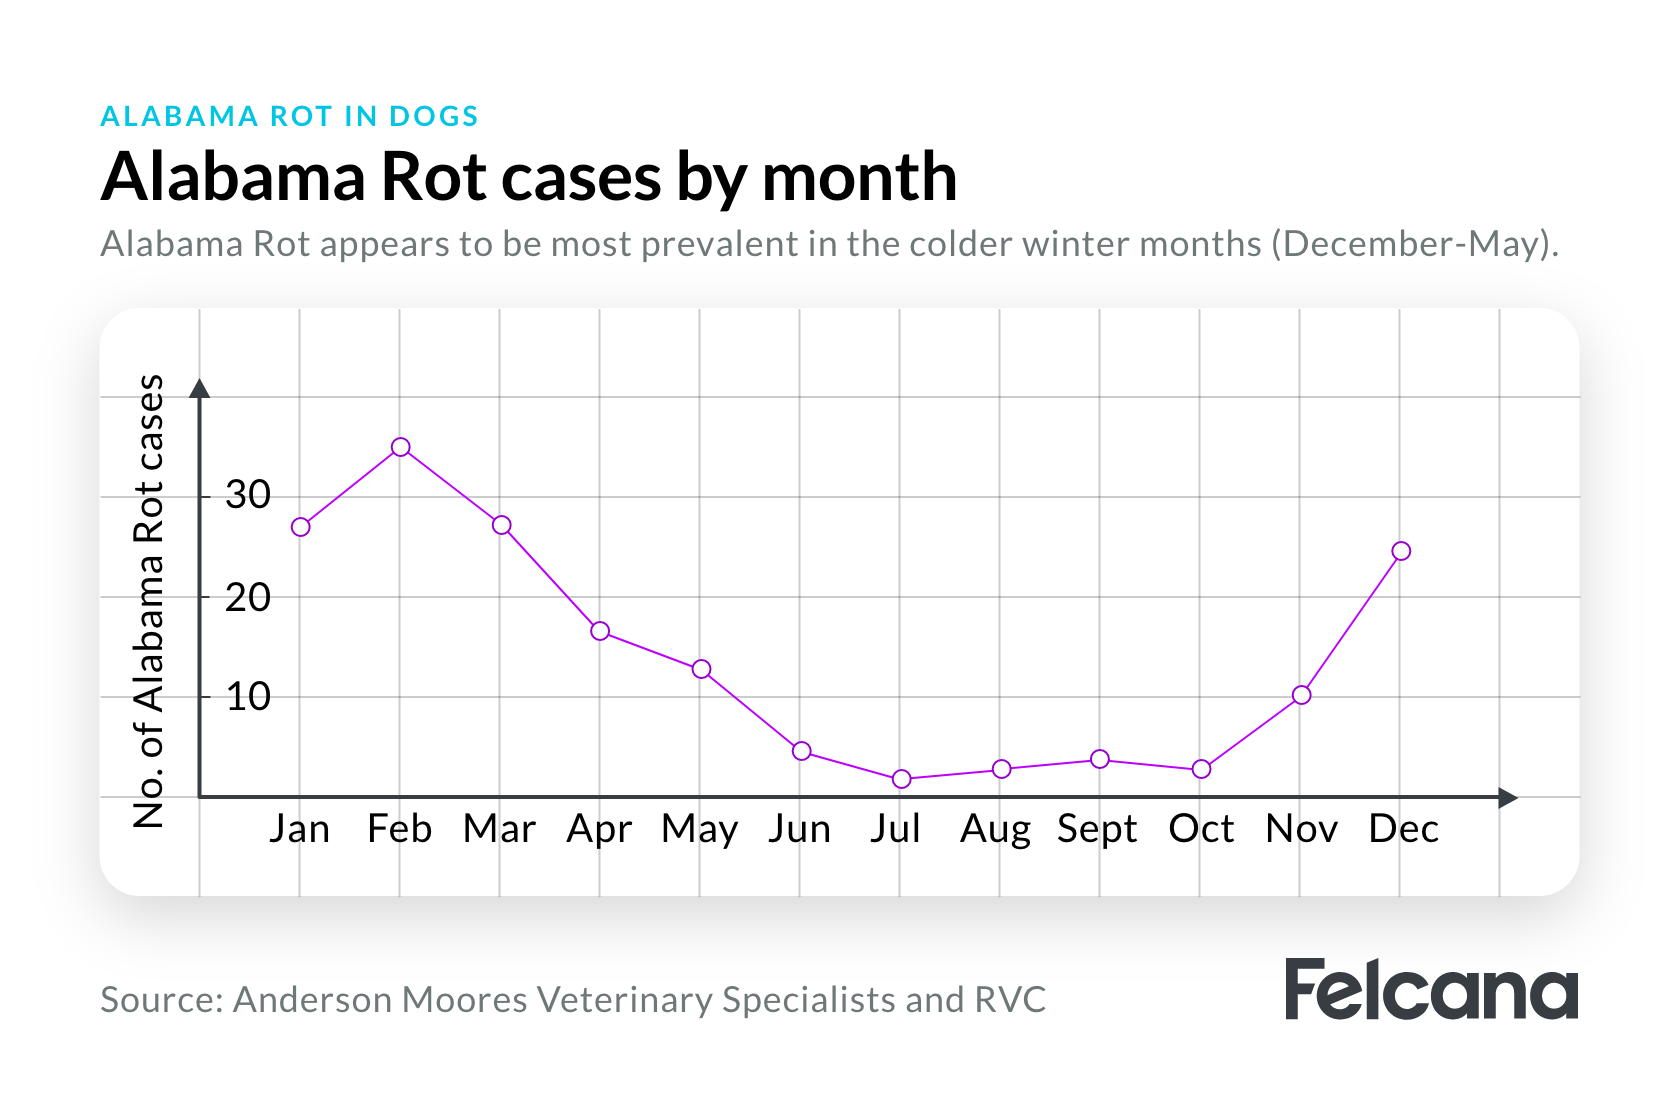 Alabama Rot cases by month